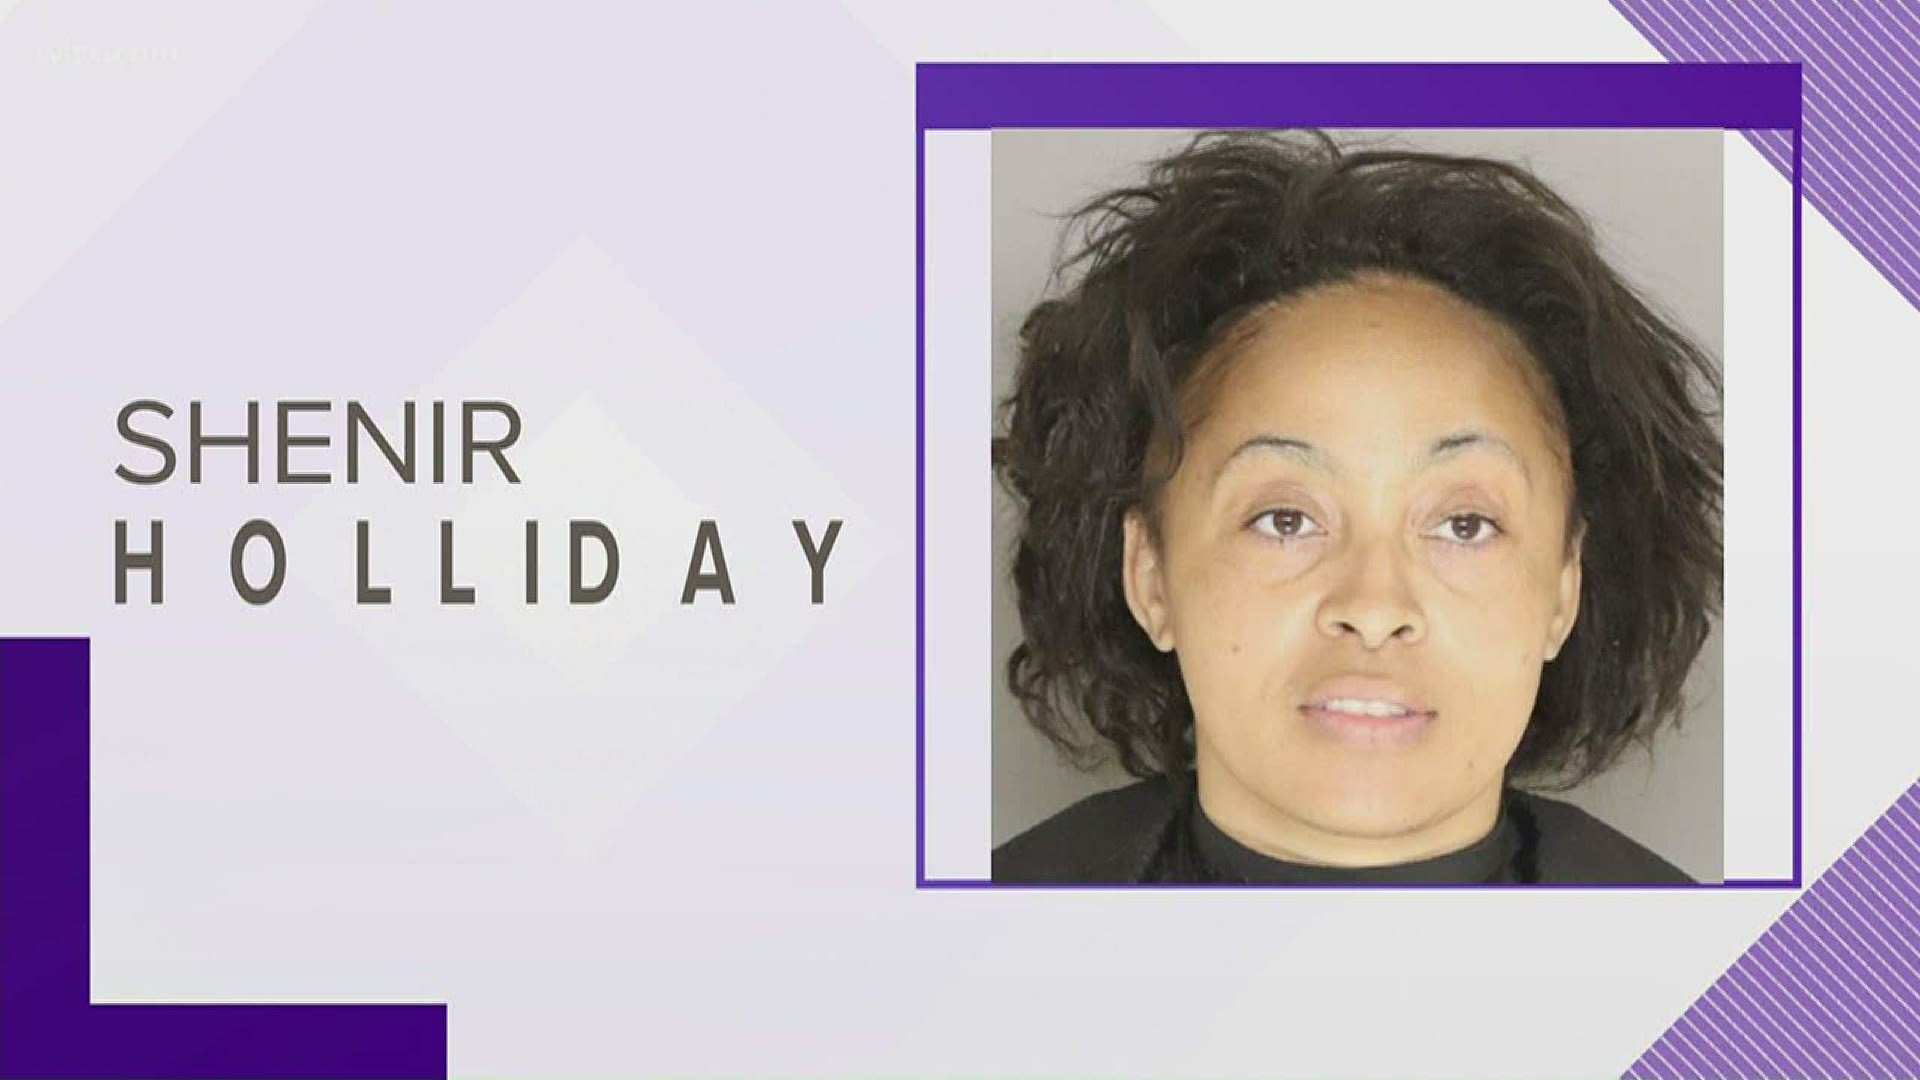 Shenir Holliday was arrested and her bond was set at $100K and she has been ordered to be tested for COVID-19